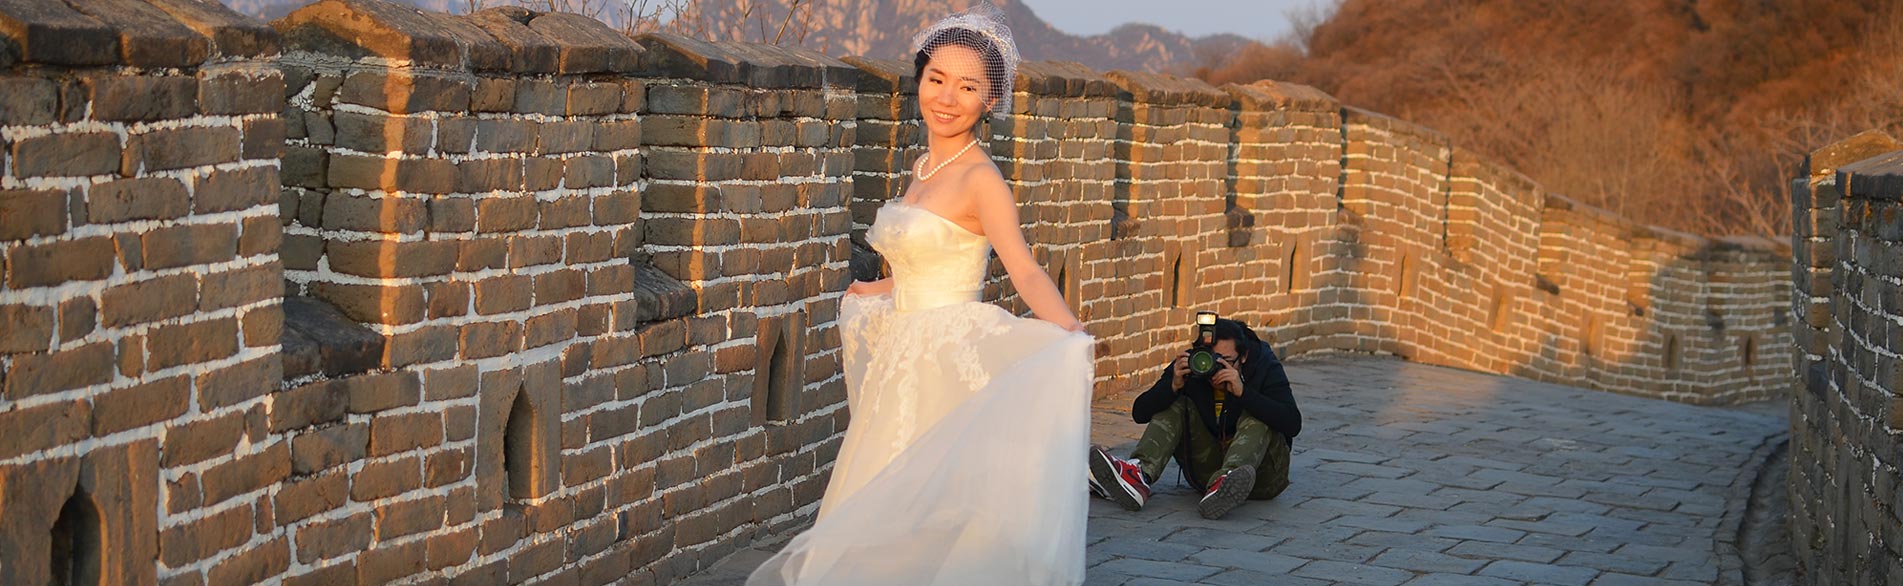 One-day Beijing Essential Tour with Great Wall Hiking at Mutianyu